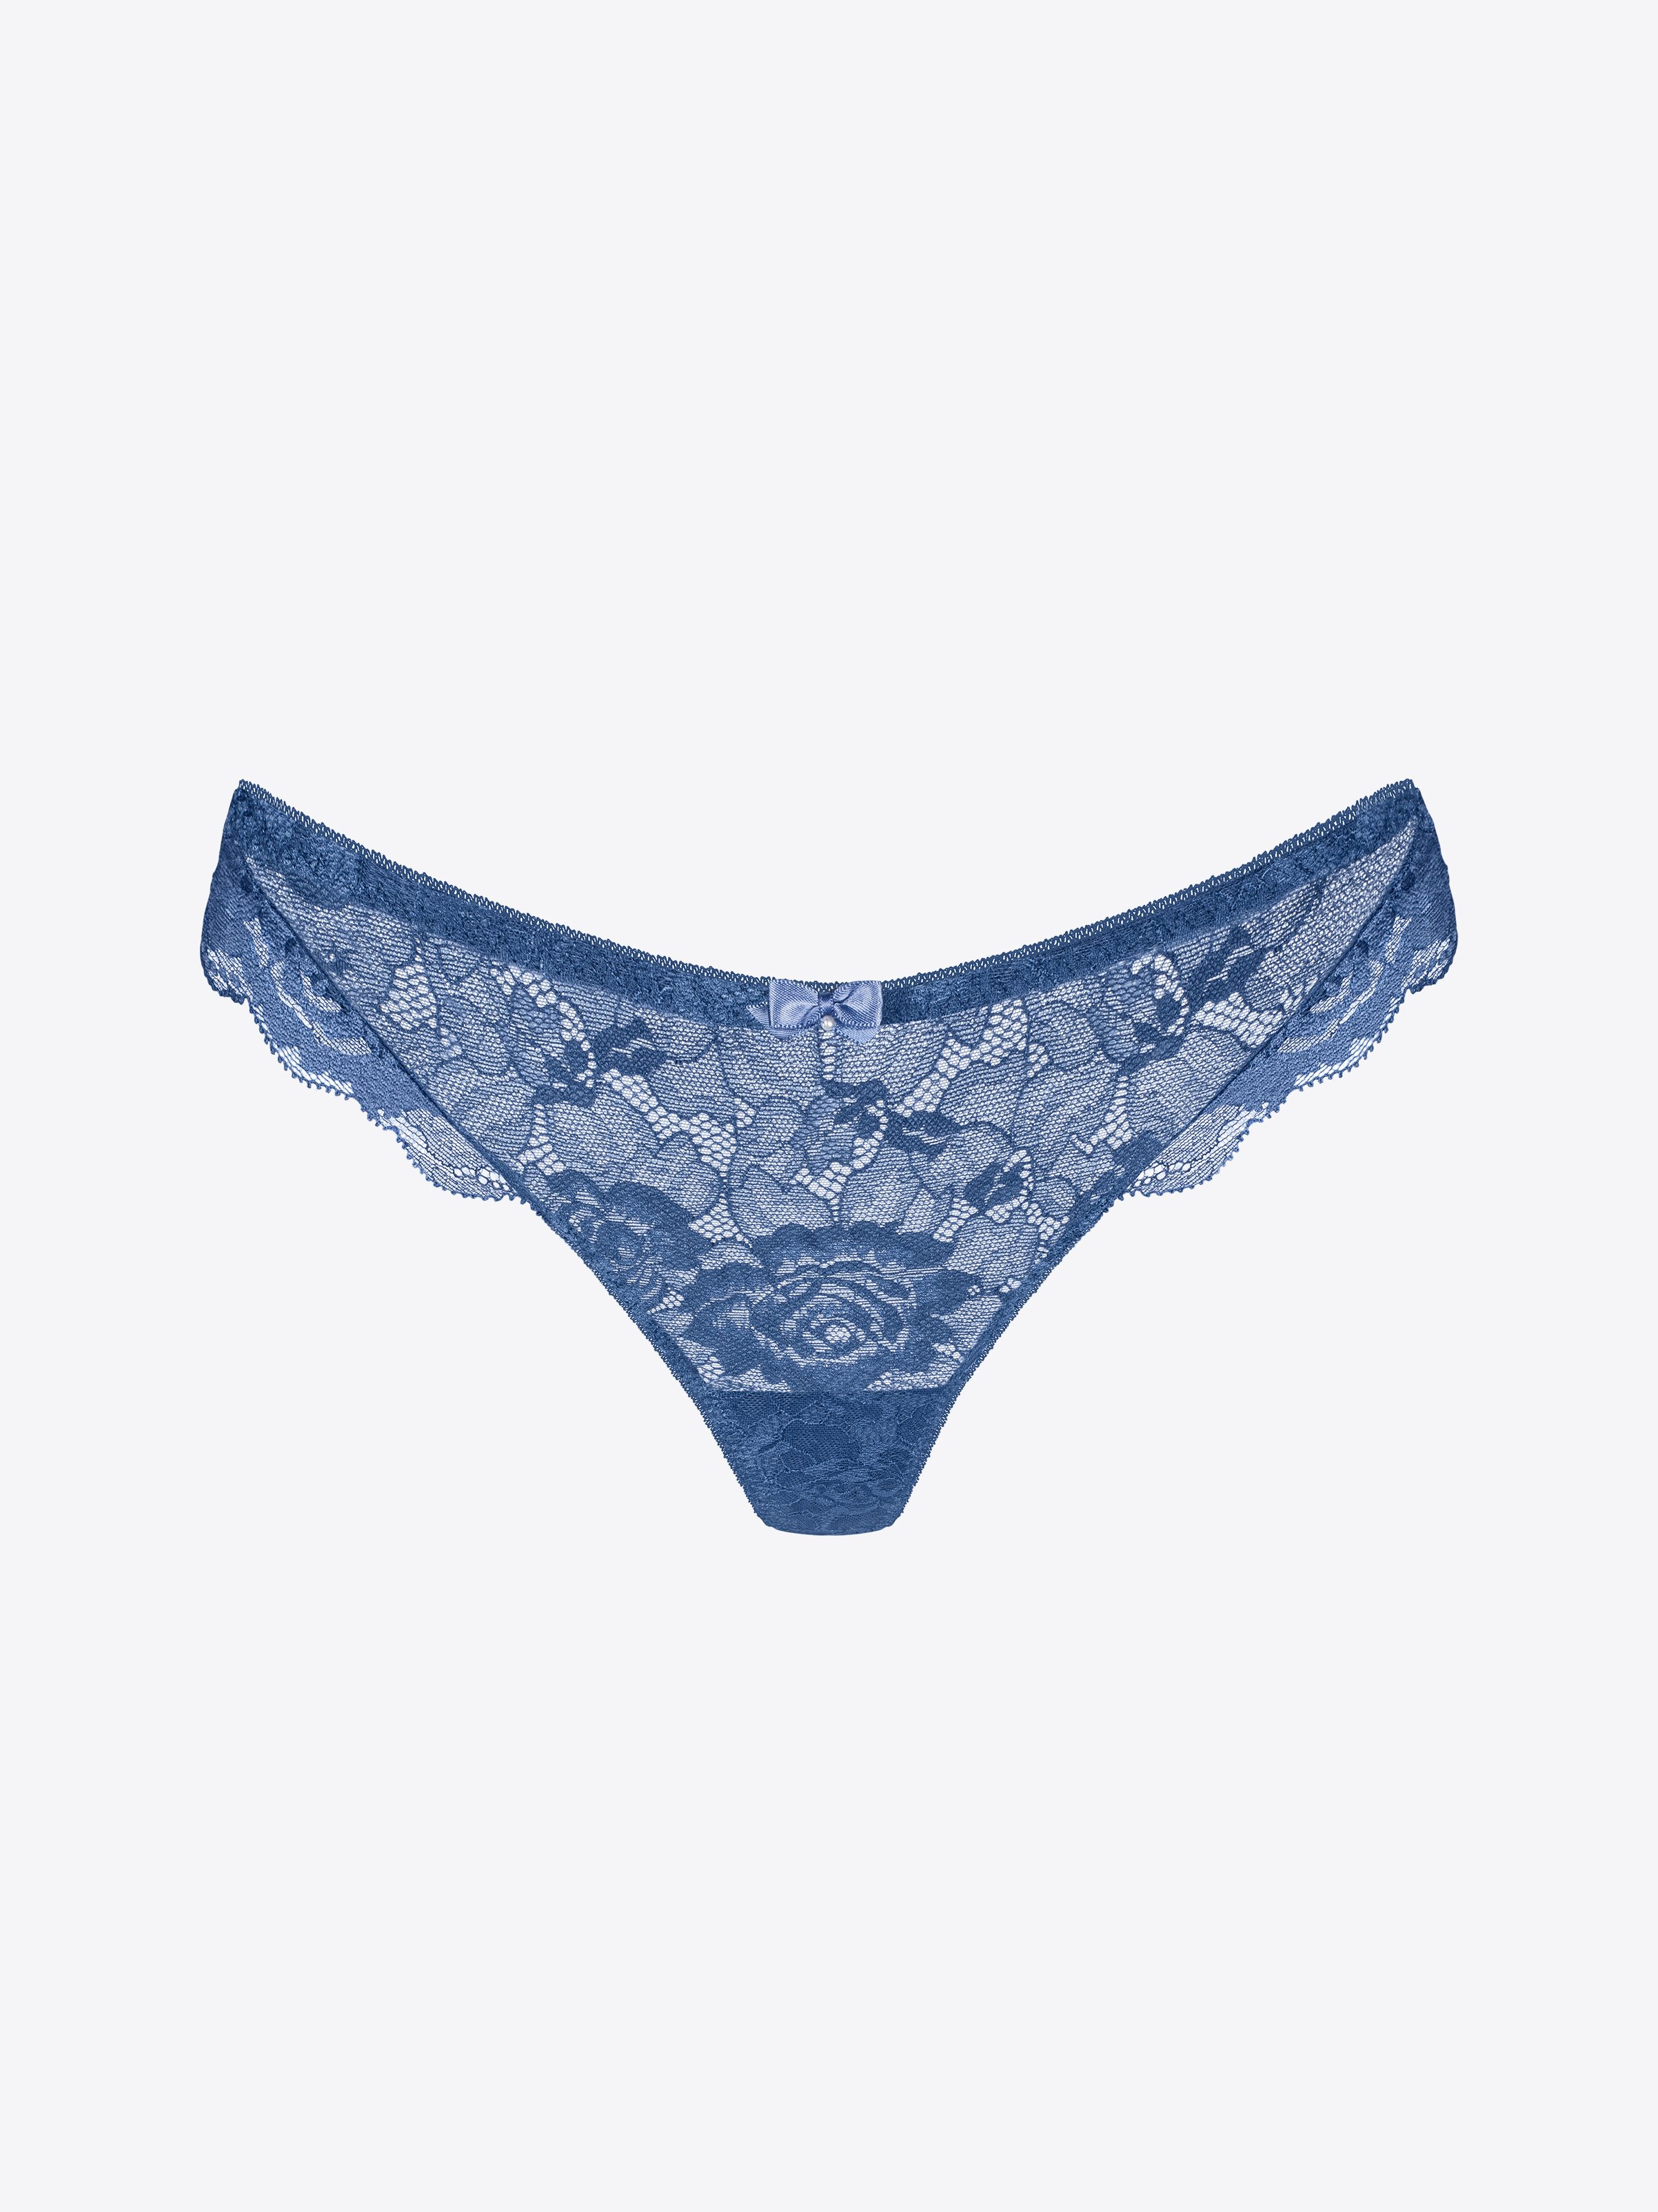 Out From Under Blue Lace Thong Underwear Women's Size Large New - beyond  exchange